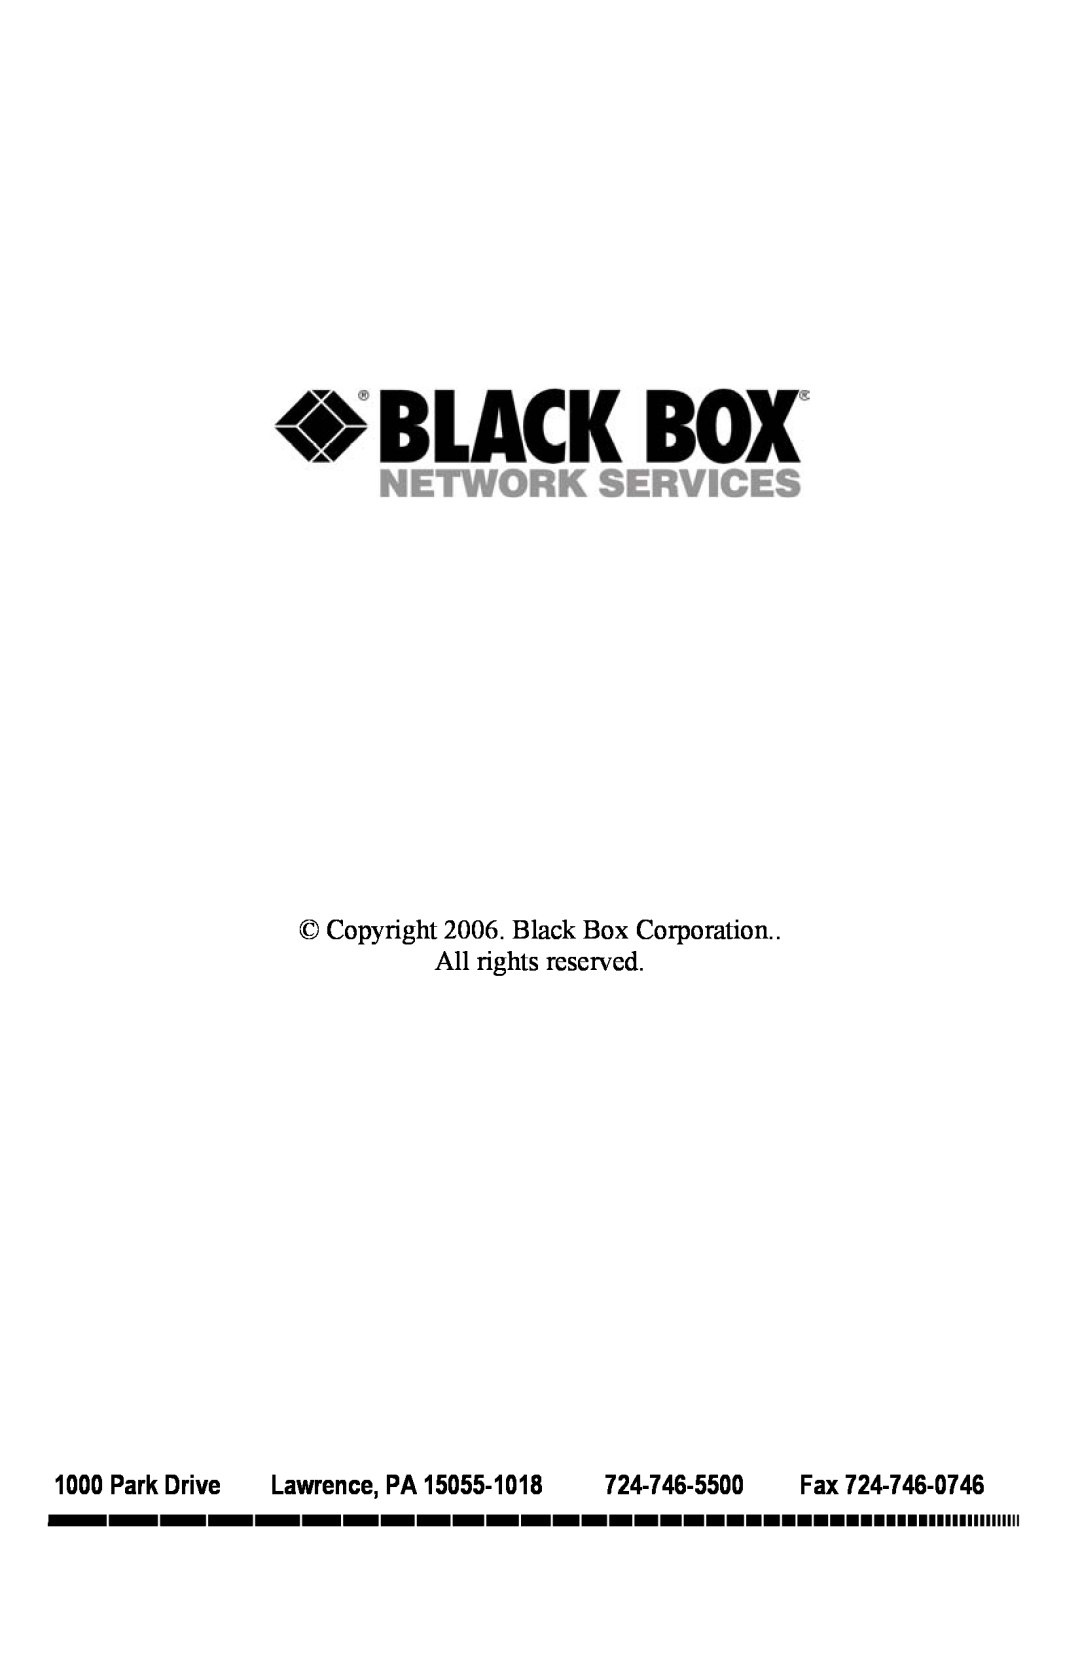 Black Box AC504A-CP manual Copyright 2006. Black Box Corporation All rights reserved, Park Drive, Lawrence, PA 